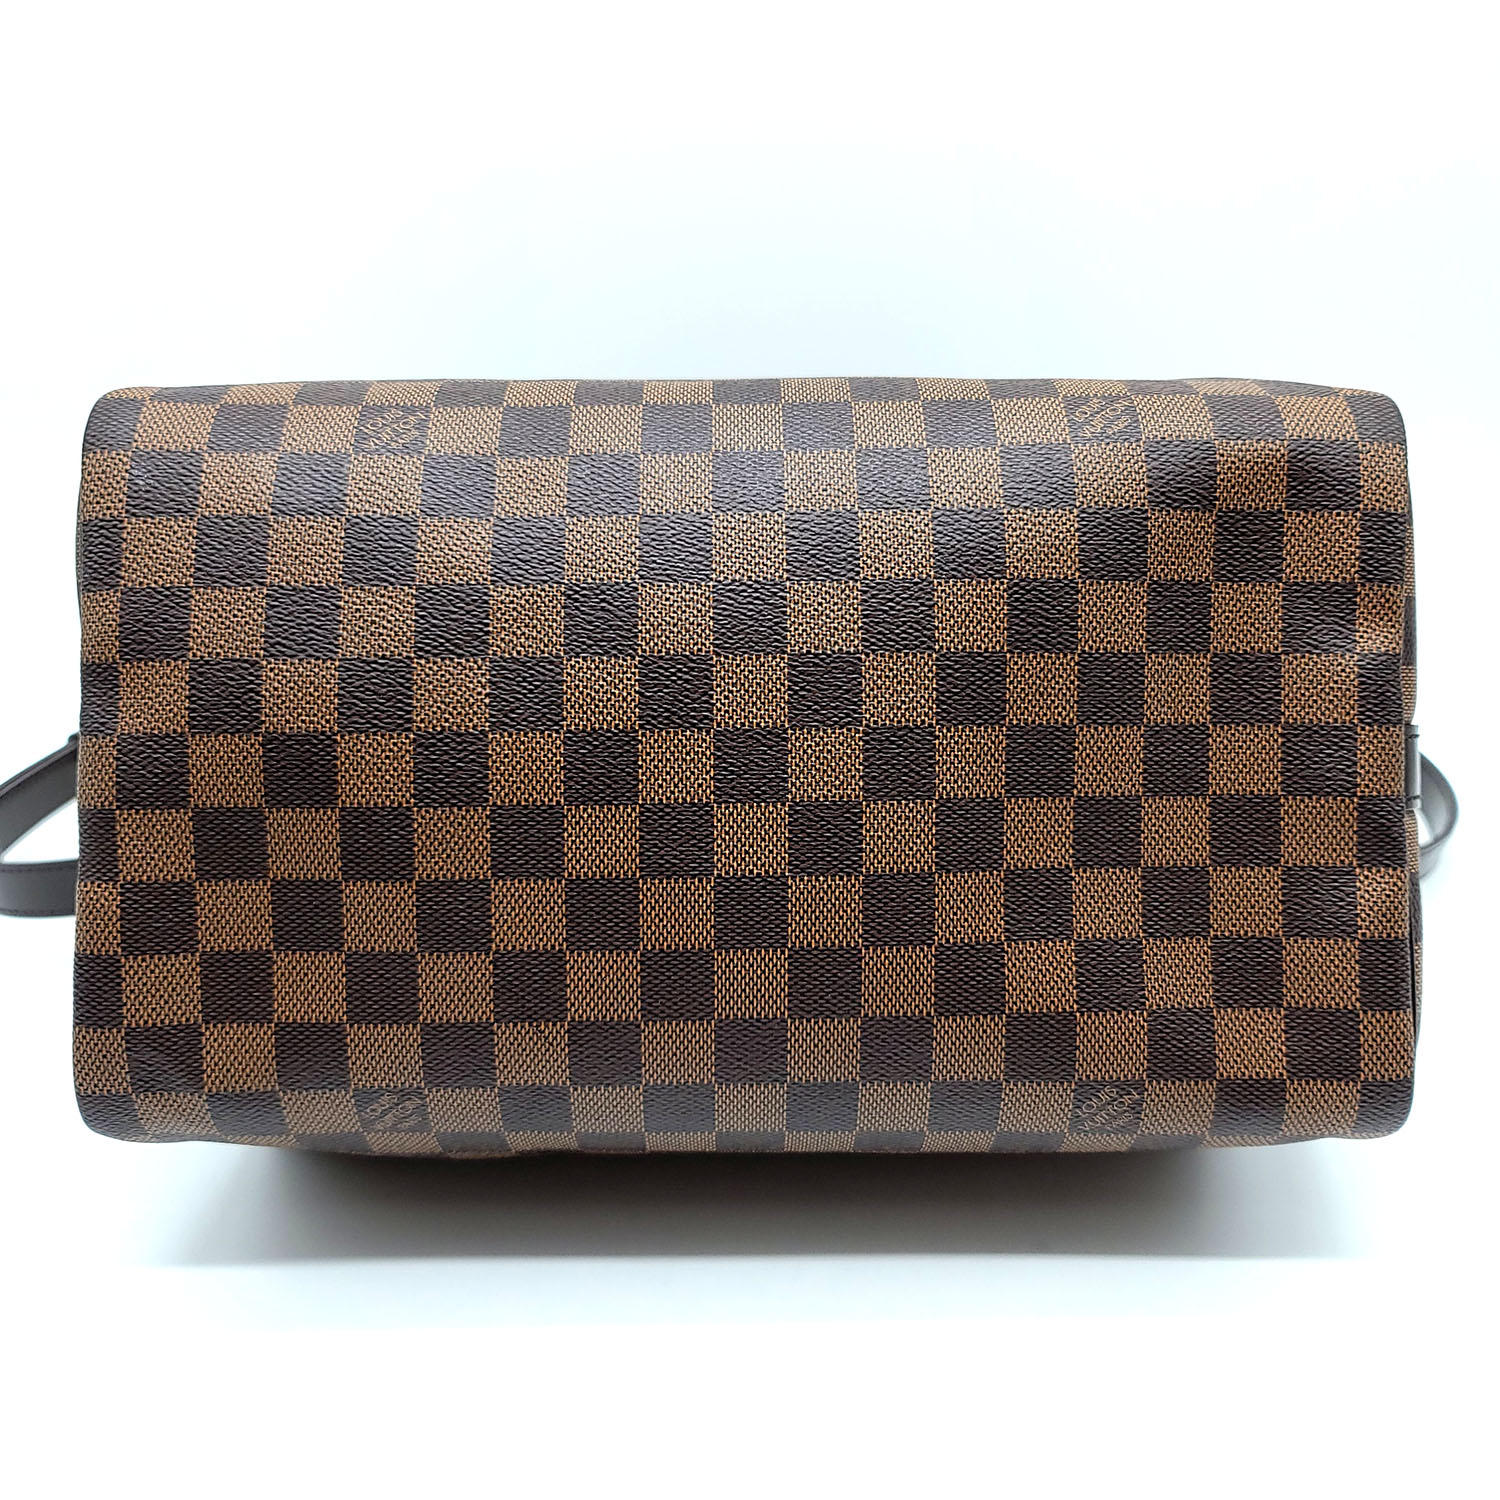 Auth Louis Vuitton Speedy Bandouliere 30 Damier Ebene N41367 Without keys  LD550